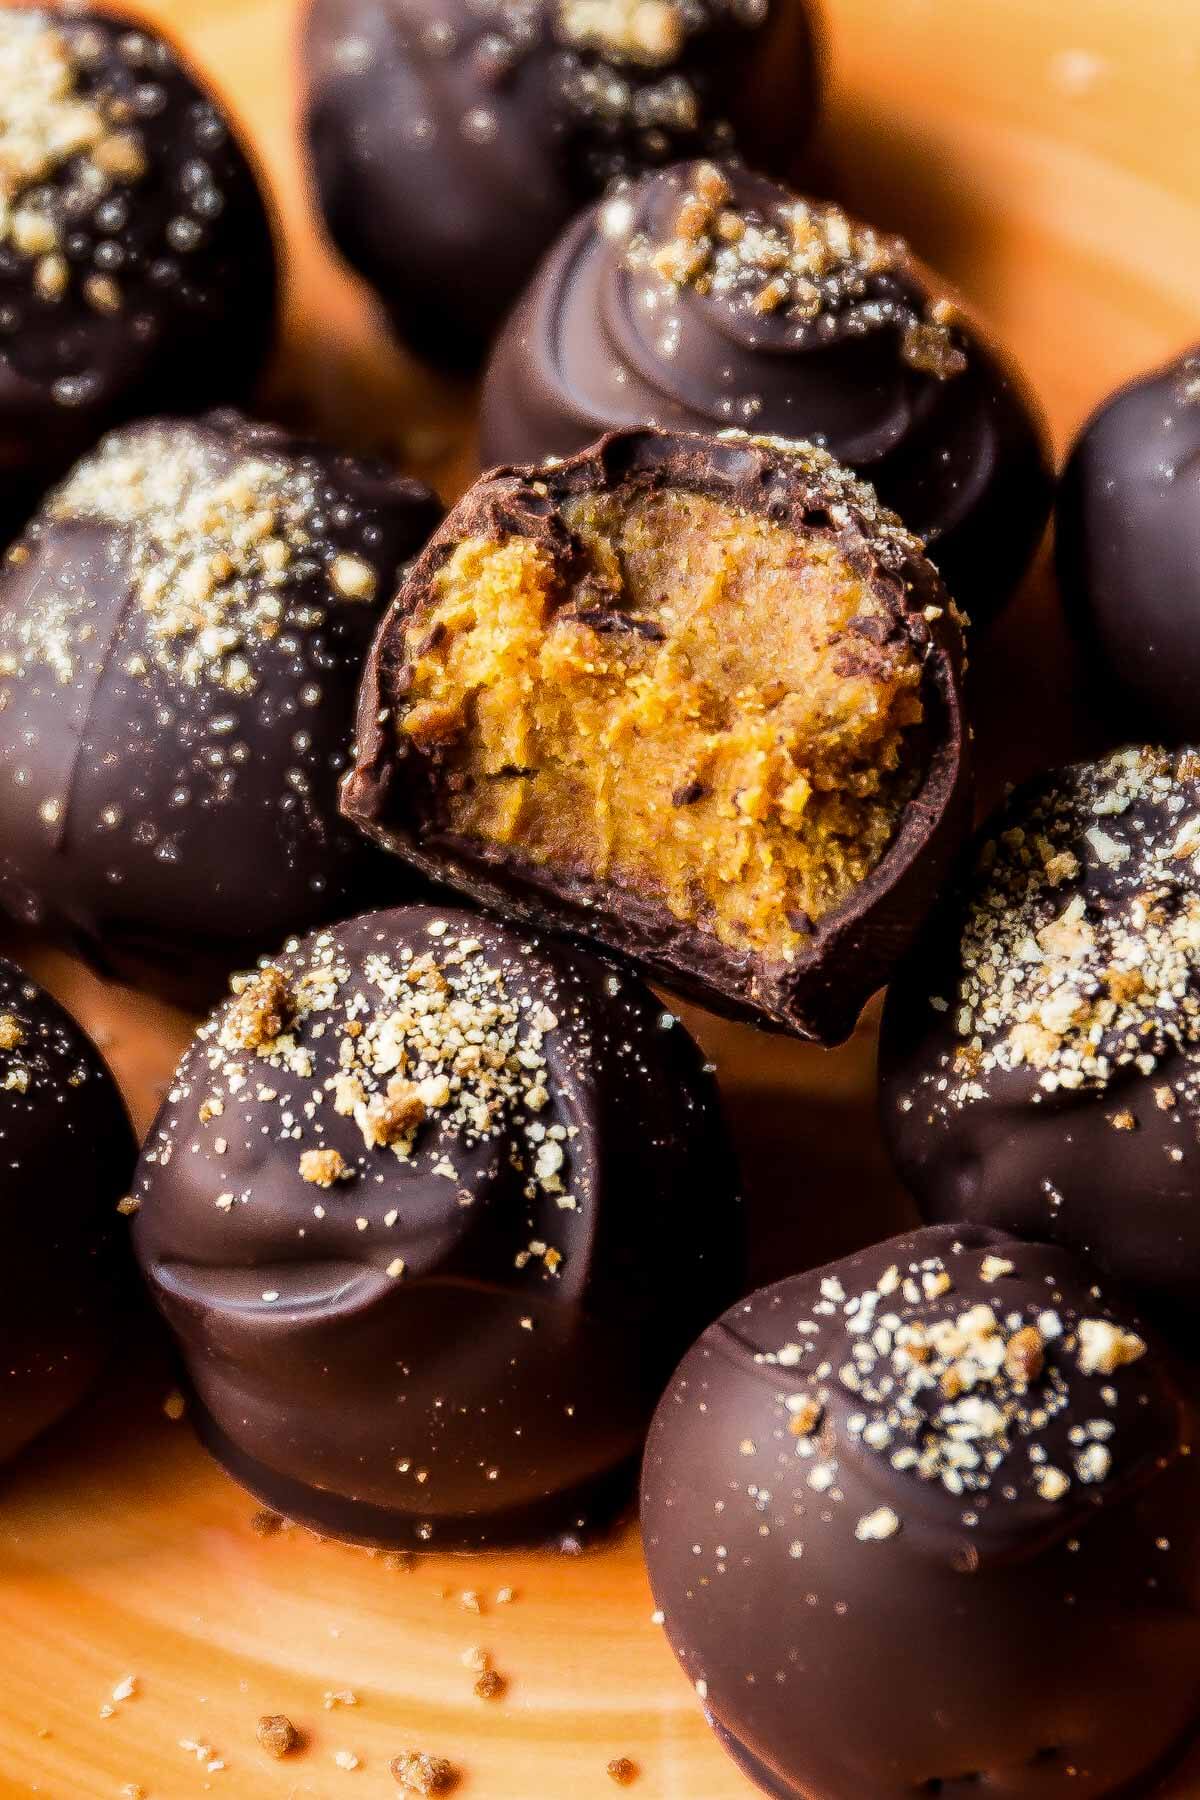 pumpkin spice truffles coated in dark chocolate and a bite taken out of one showing the truffle filling